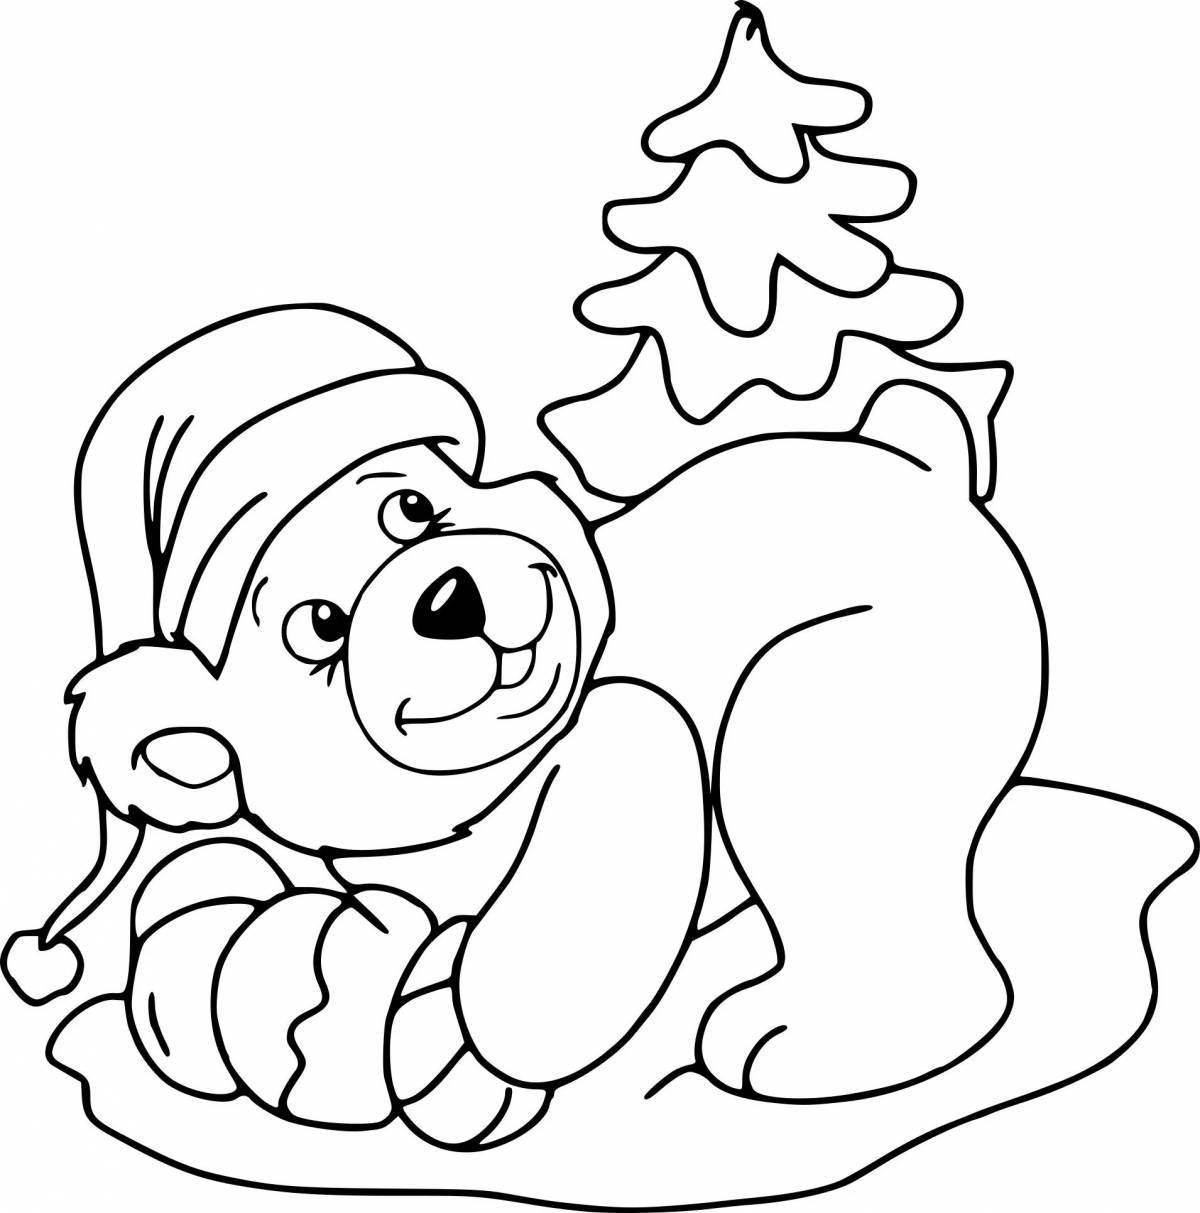 Playful winter coloring book for 3-4 year olds